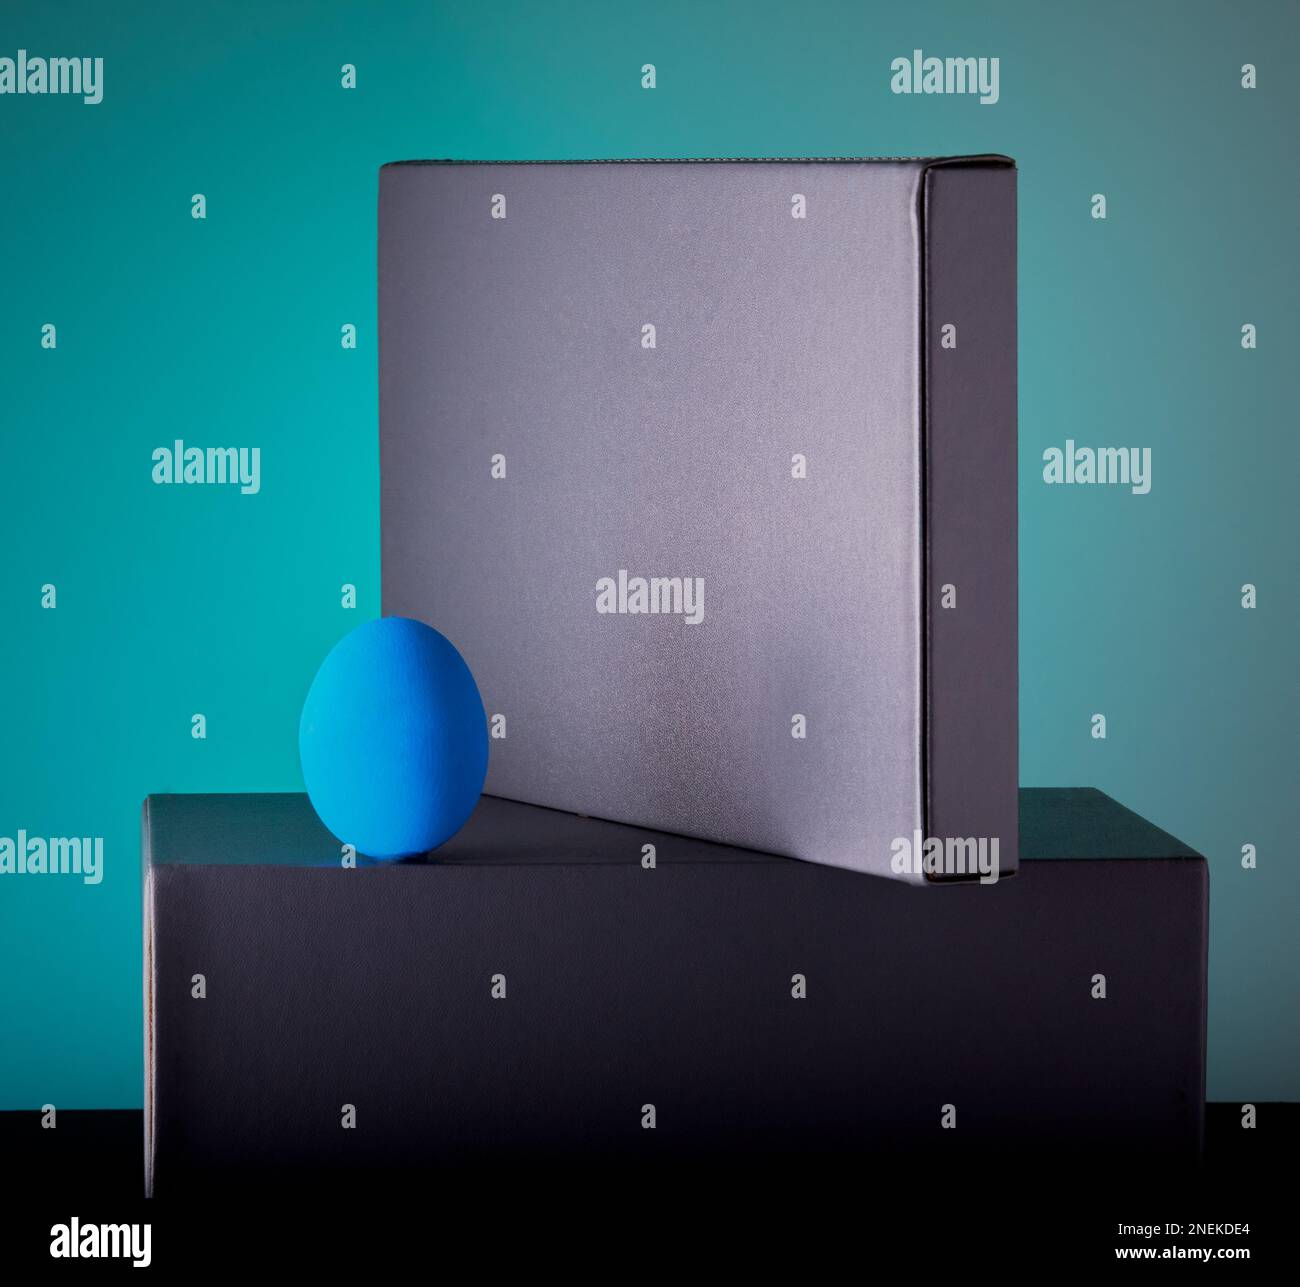 New beginnings concept with a blue egg on some studio blocks with a blue gradient background. Stock Photo